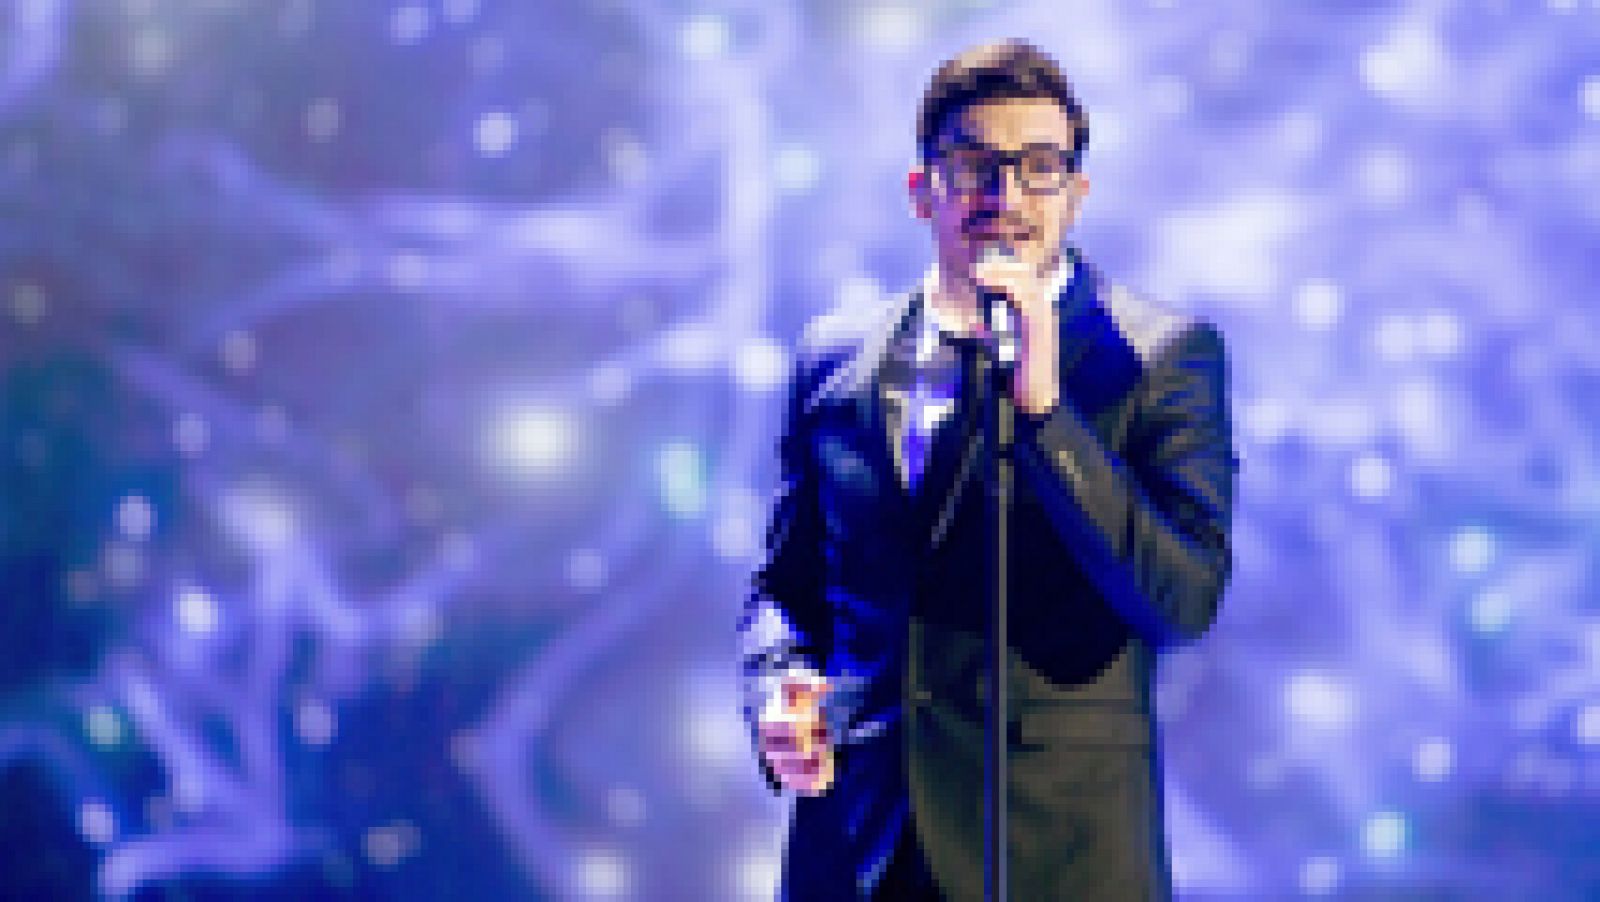 Eurovisión 2015 - Chipre: Giannis Karagiannis canta 'One Thing I Should Have Done'